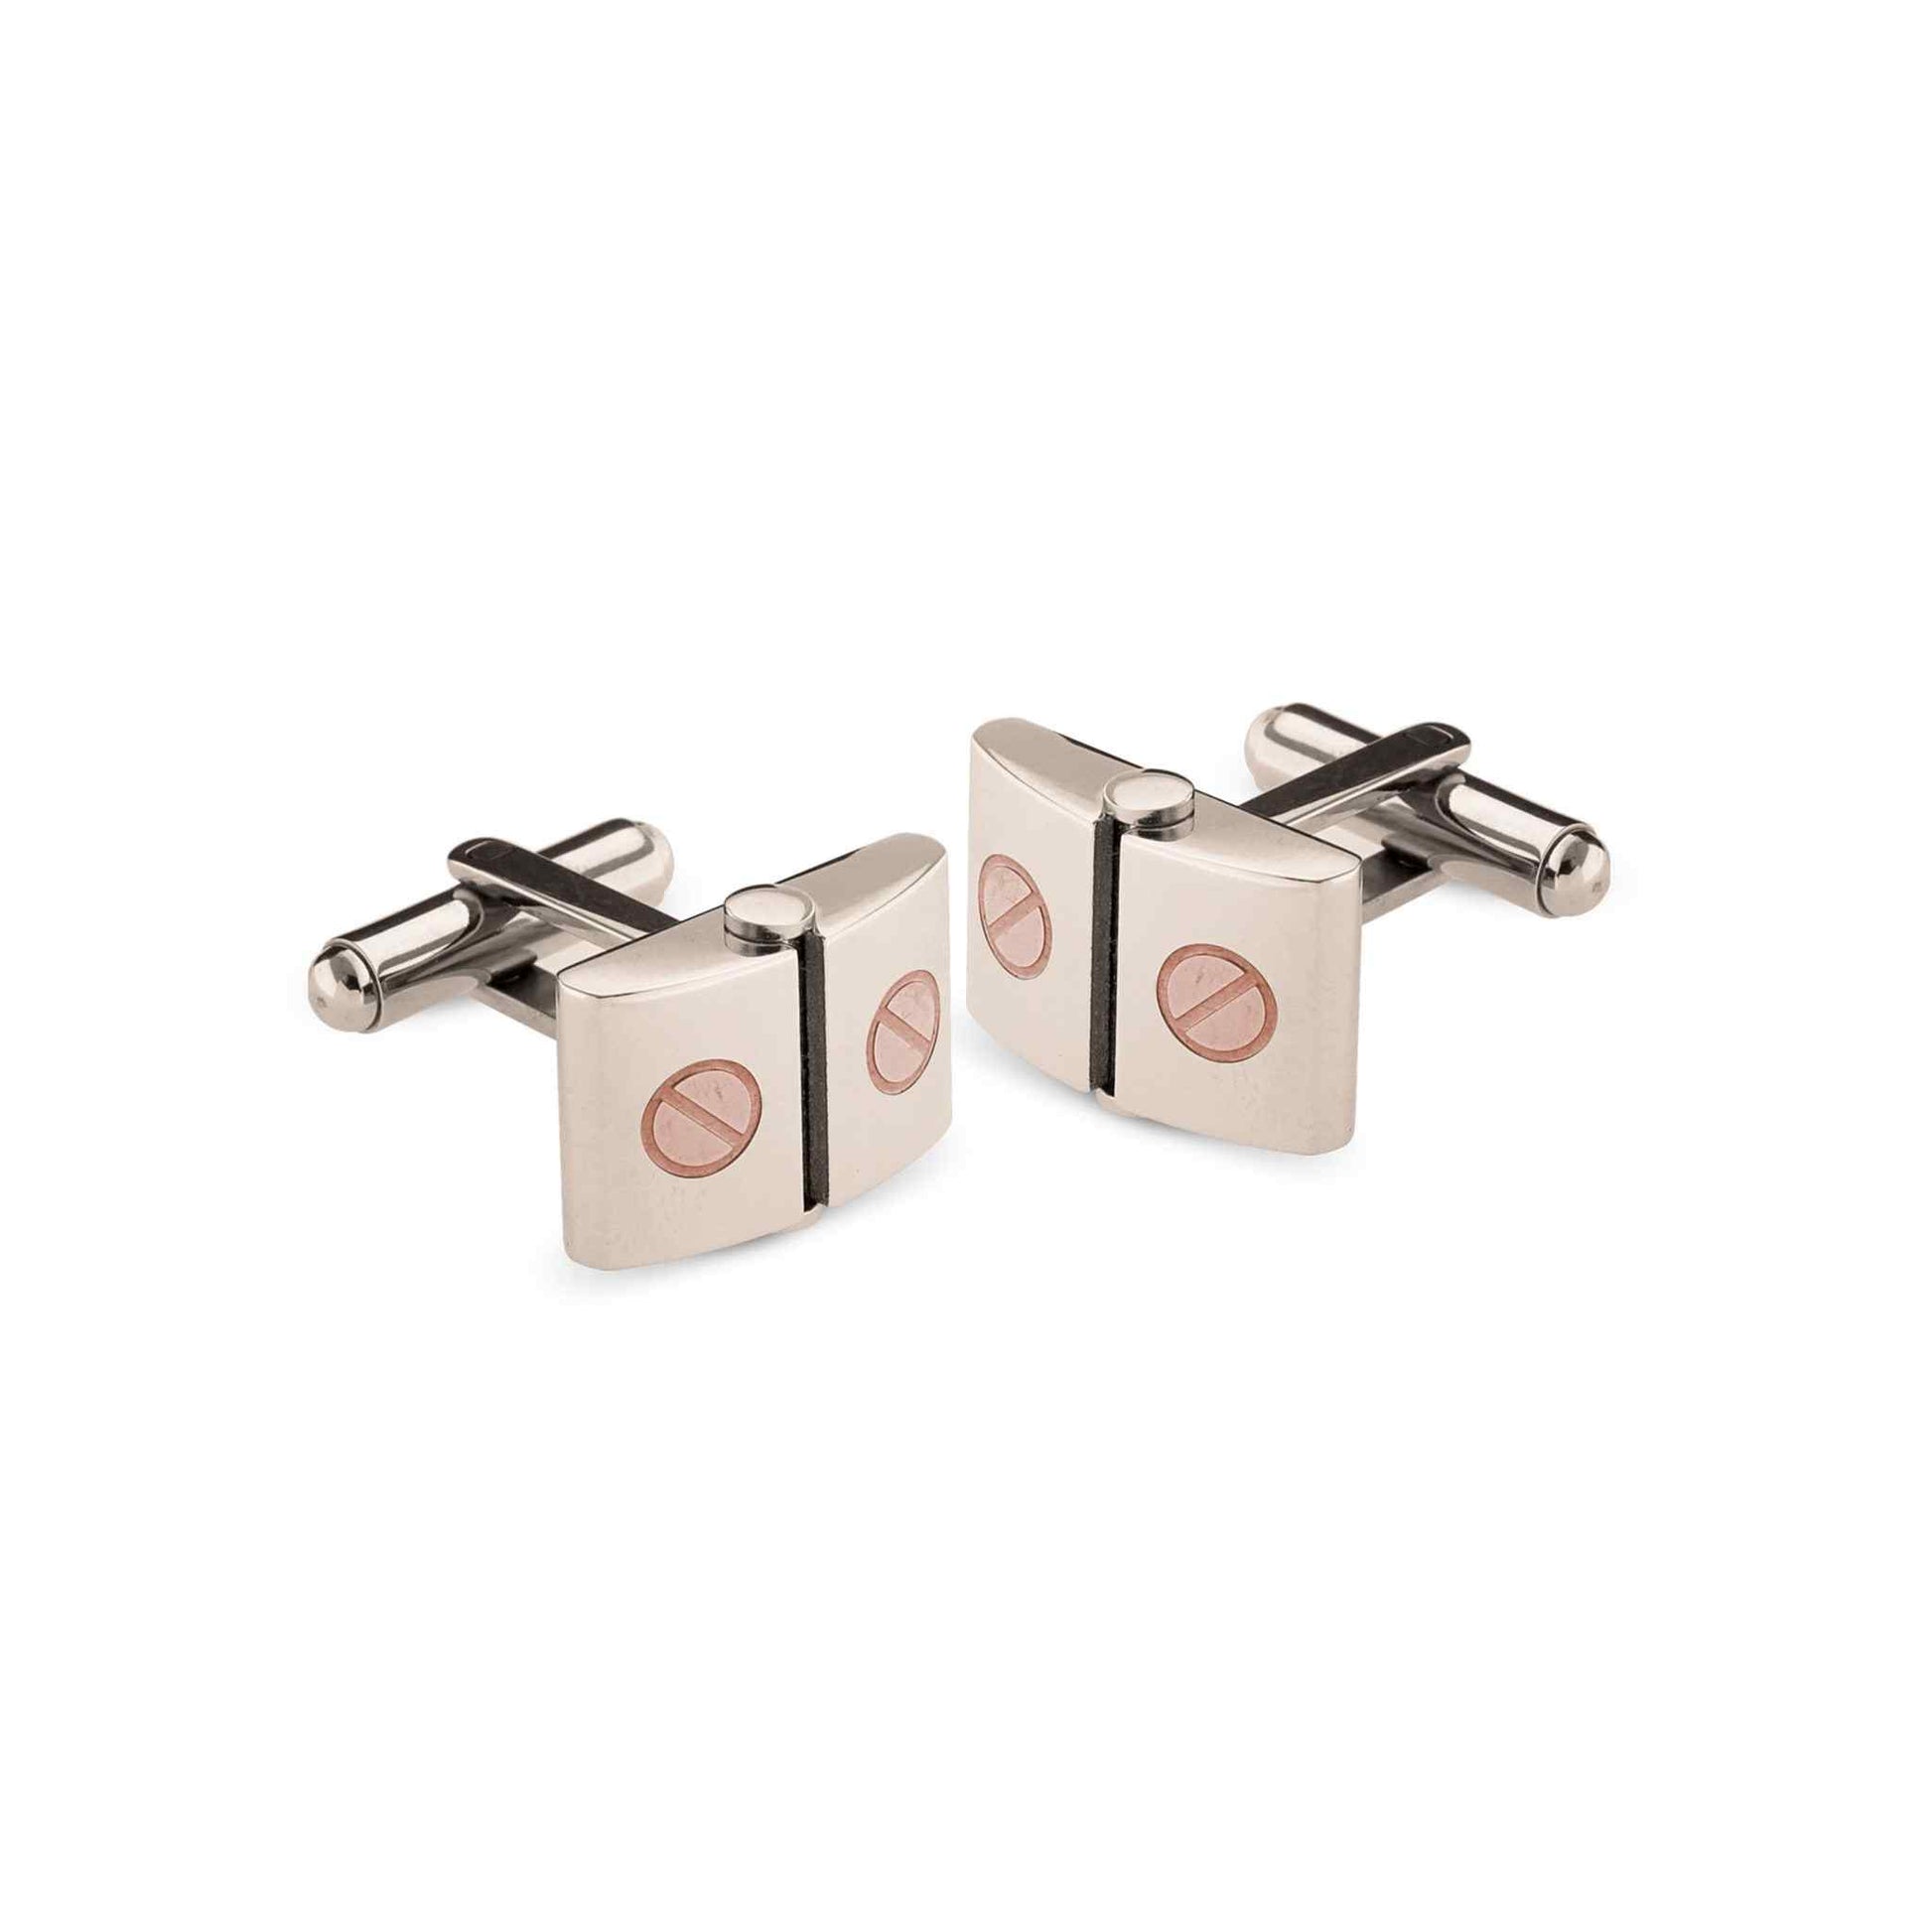 A stainless steel two tone rose gold pvd cufflinks displayed on a neutral white background.